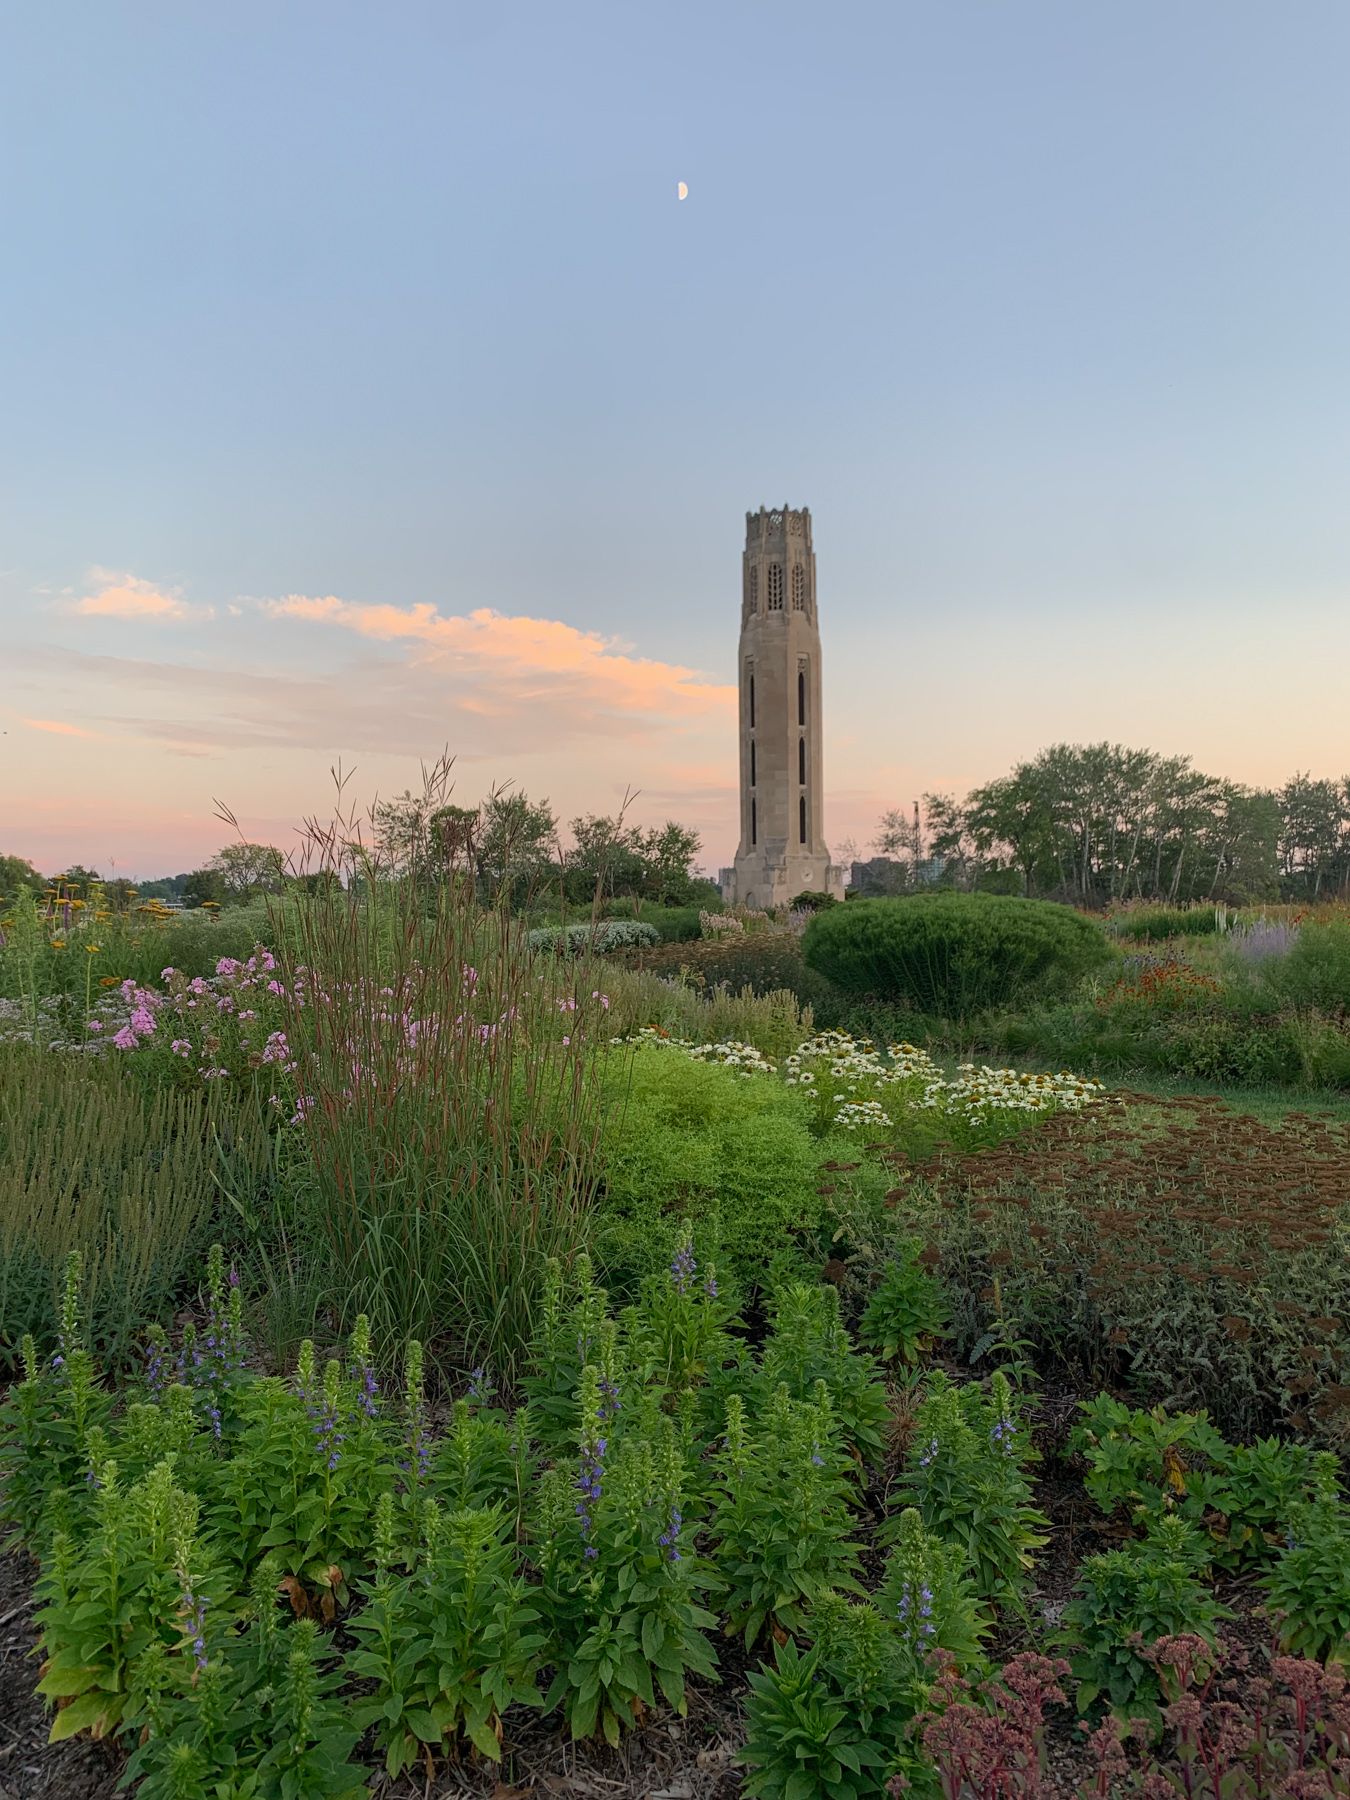 Landscaped garden of mostly native plants at dusk. Orange and pink skies, stone clock tower, half-moon above.